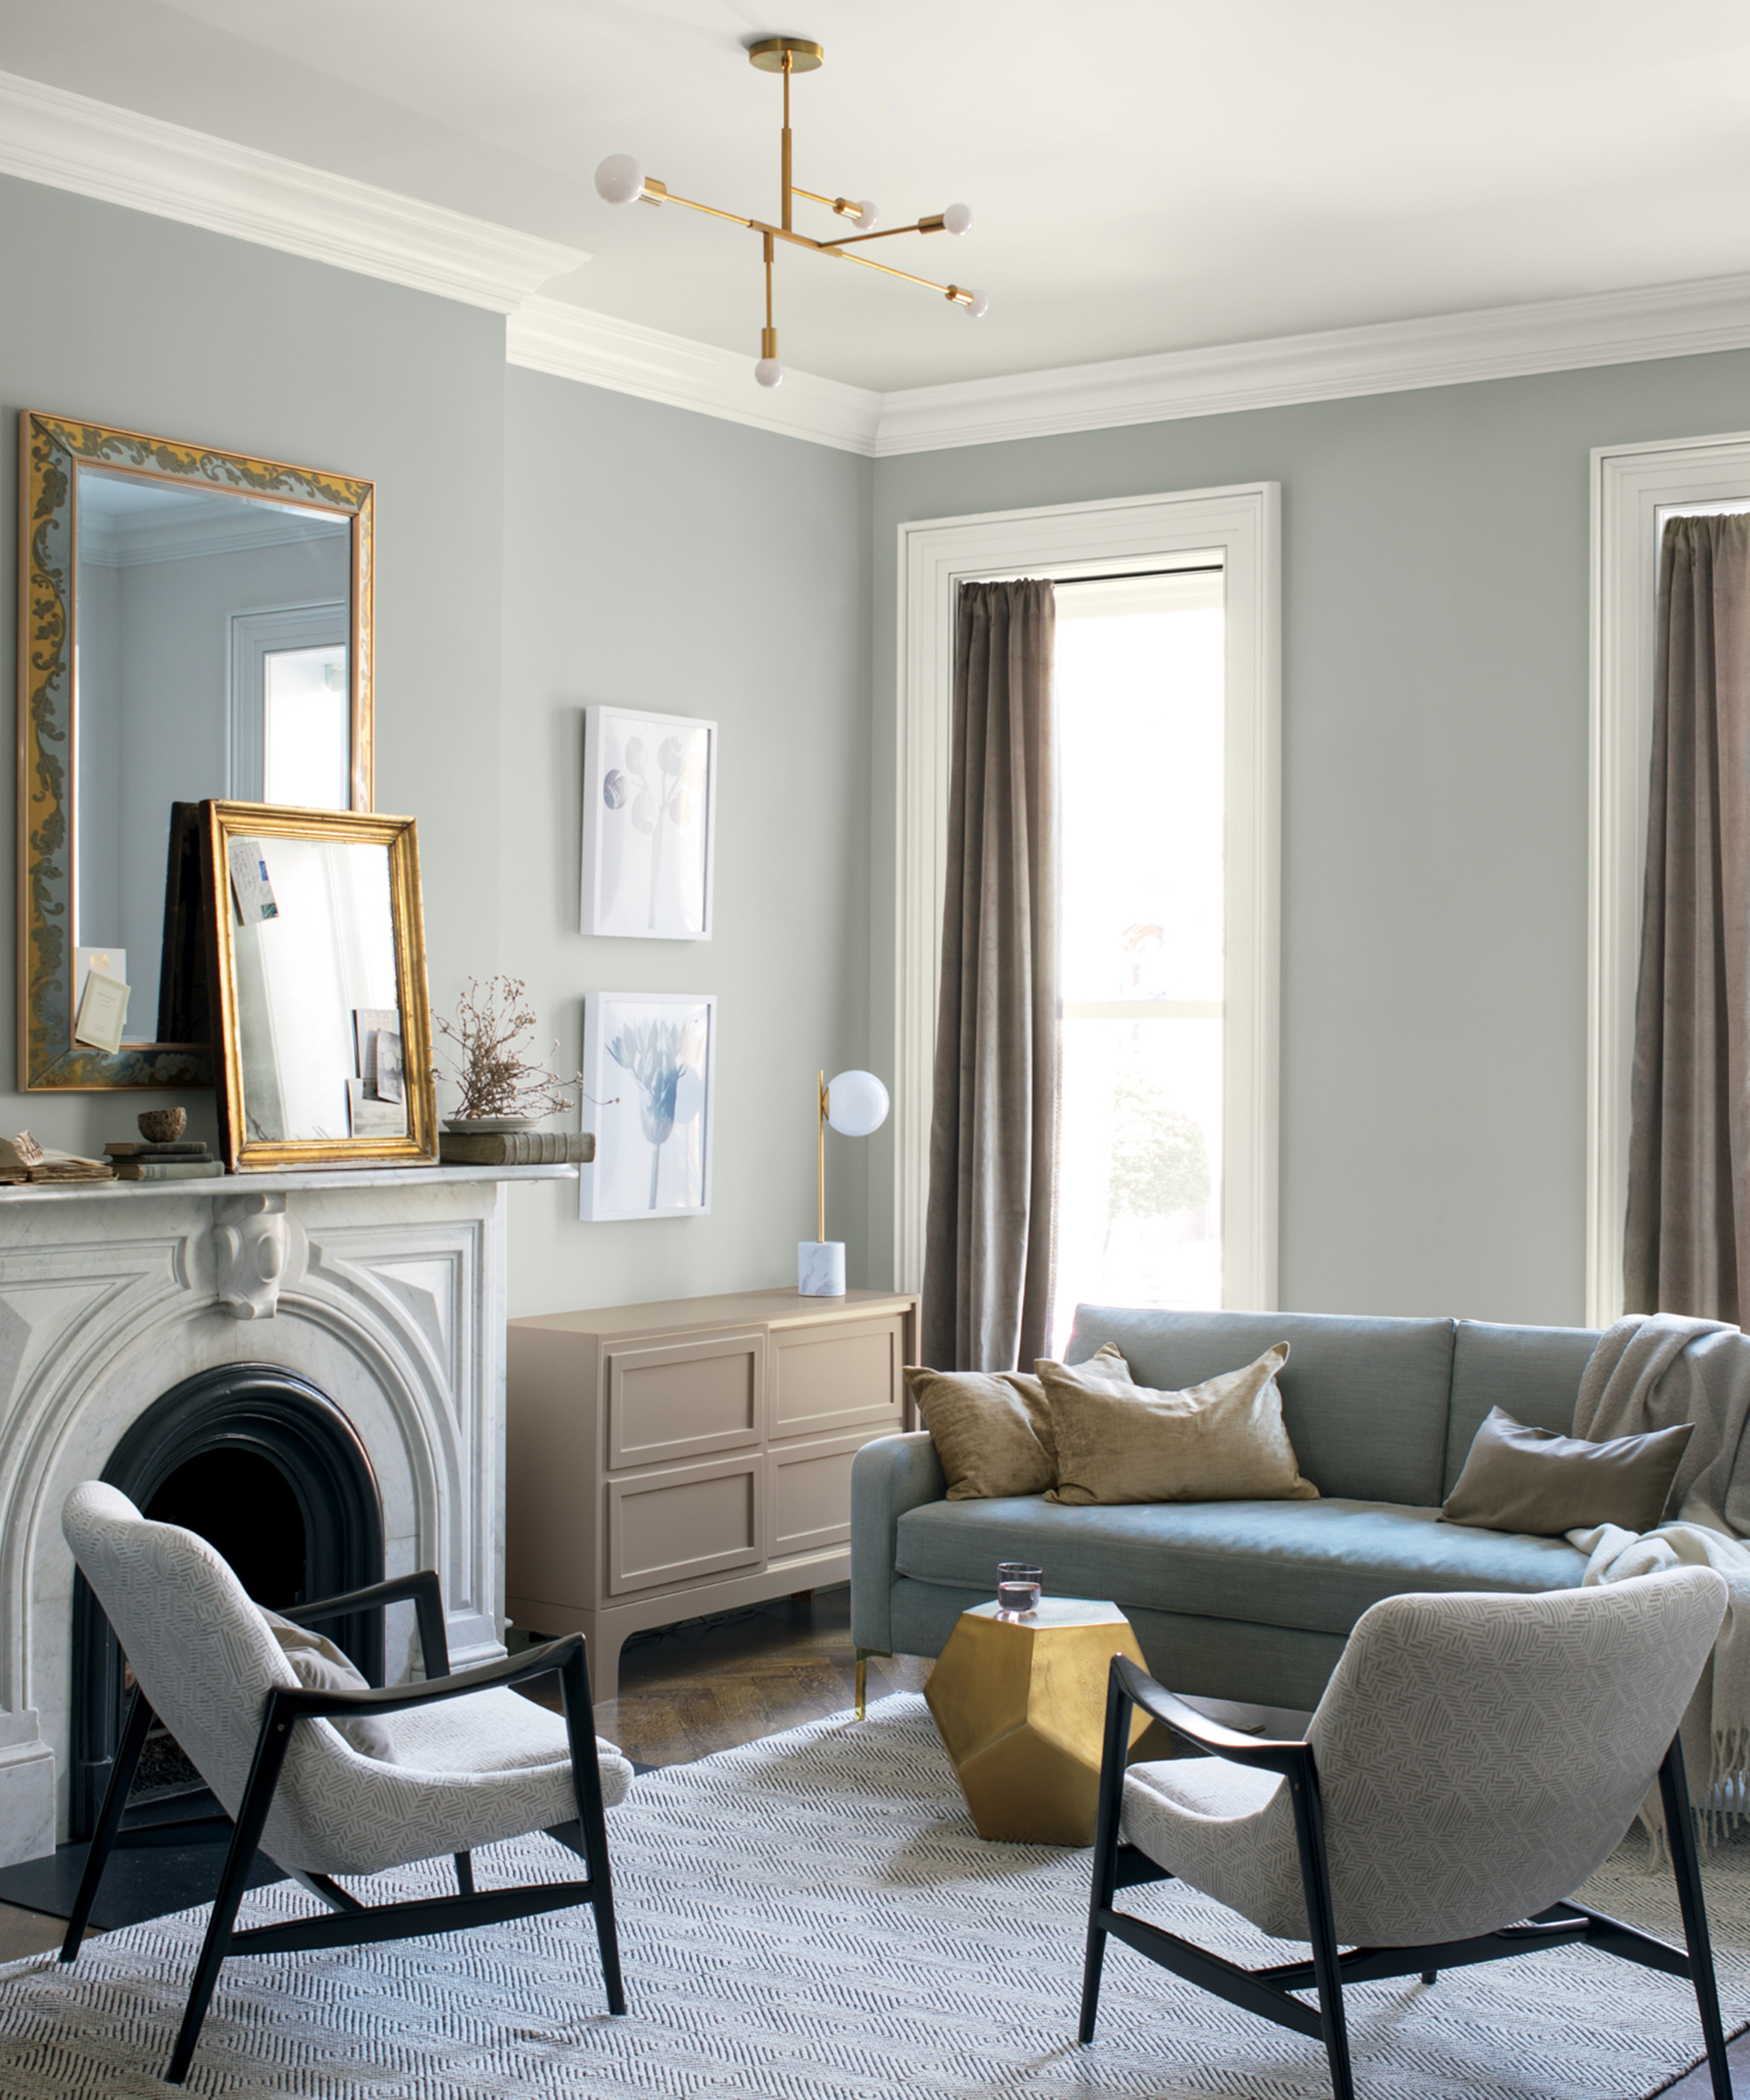 A grey living room by Benjamin Moore with two mirror over fireplace mantel